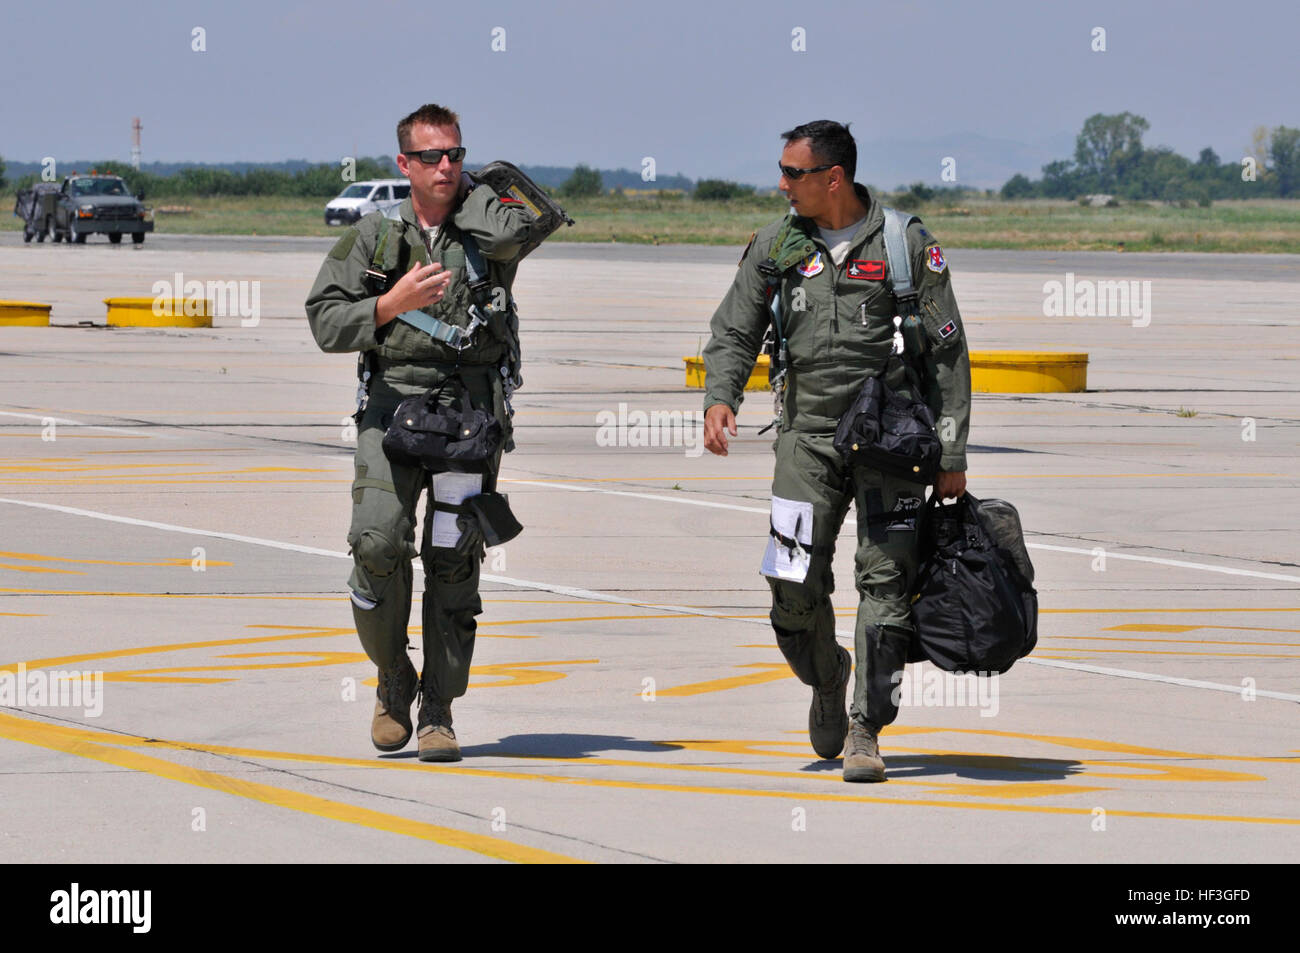 U.S. Air Force Lt. Col. Philippe Malebranche, right, and Maj. Benjamin Robbins, F-16 pilots with the 177th Fighter Wing, walk to their post-flight briefing after a training mission during Thracian Star, a bilateral training exercise to enhance interoperability with the Bulgarian air force, at Graf Ignatievo Air Base, Bulgaria, on July 13, 2015. (U.S. Air National Guard photo by Master Sgt. Andrew J. Moseley/Released) New Jersey Air National Guard trains with Bulgarian air force at Thracian Star 150713-Z-YH452-166 Stock Photo